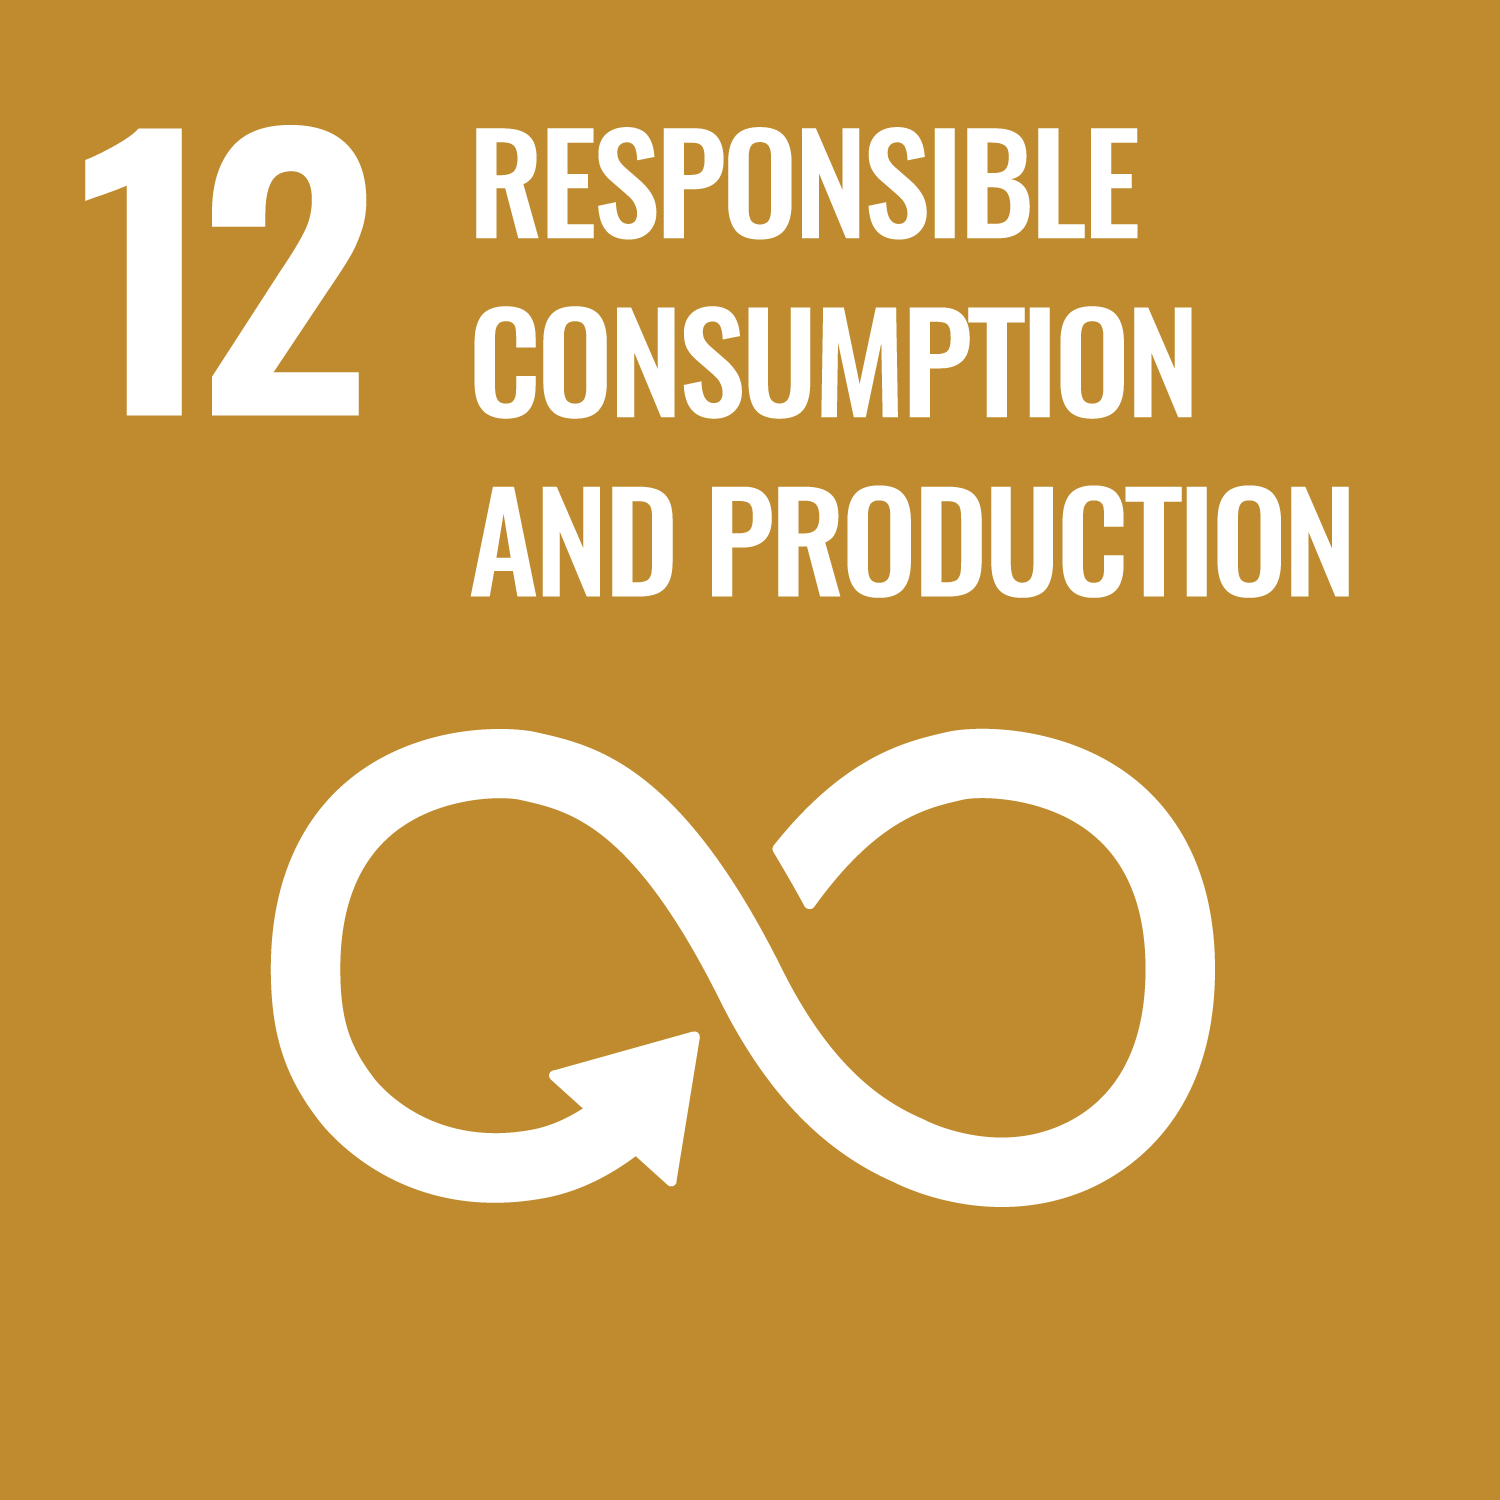 SDG Goal 12, Responsible Consumption and Production